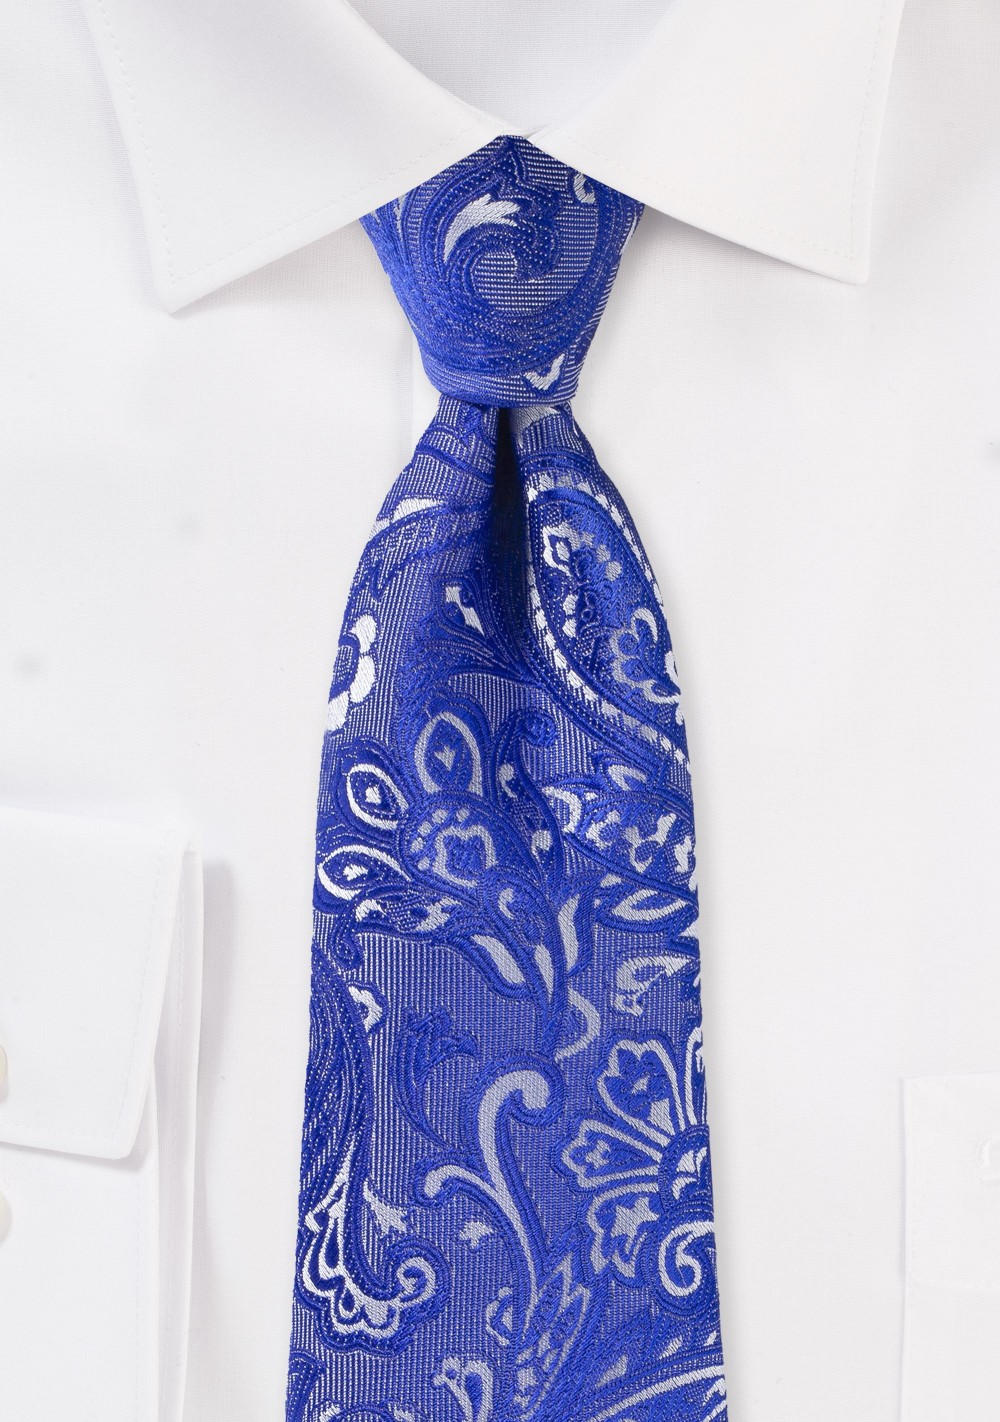 Kids Paisley Tie in Morning Glory Blue